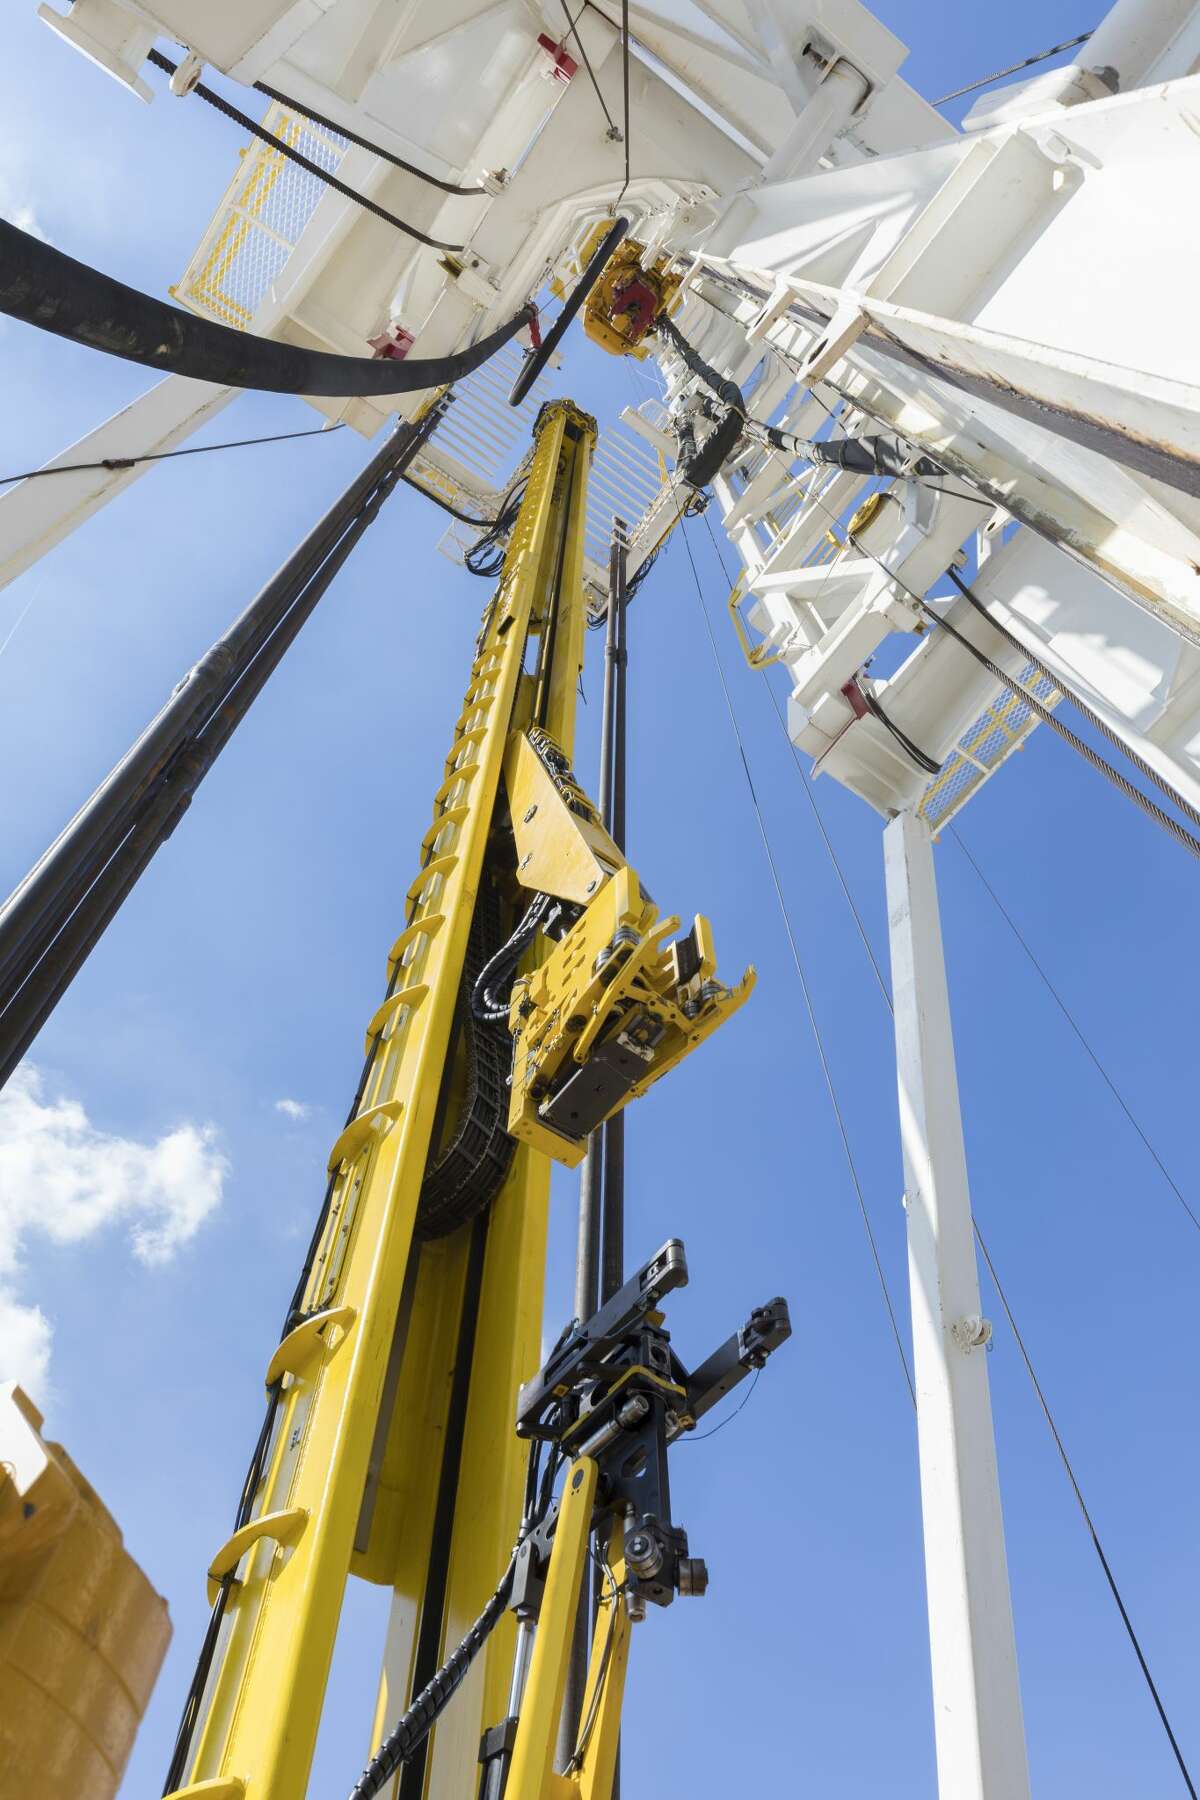 ‘Big data’, ‘deep learning’ and artificial intelligence are in the process of transforming upstream operations. Oil field equipment such as Baker Hughes’ new TerrAdapt smart bit can sense rock types and act to protect the bit’s cutters, and Nabors’ iRacker drilling system uses robotics to piece together and insert steel pipe underground to build wells.